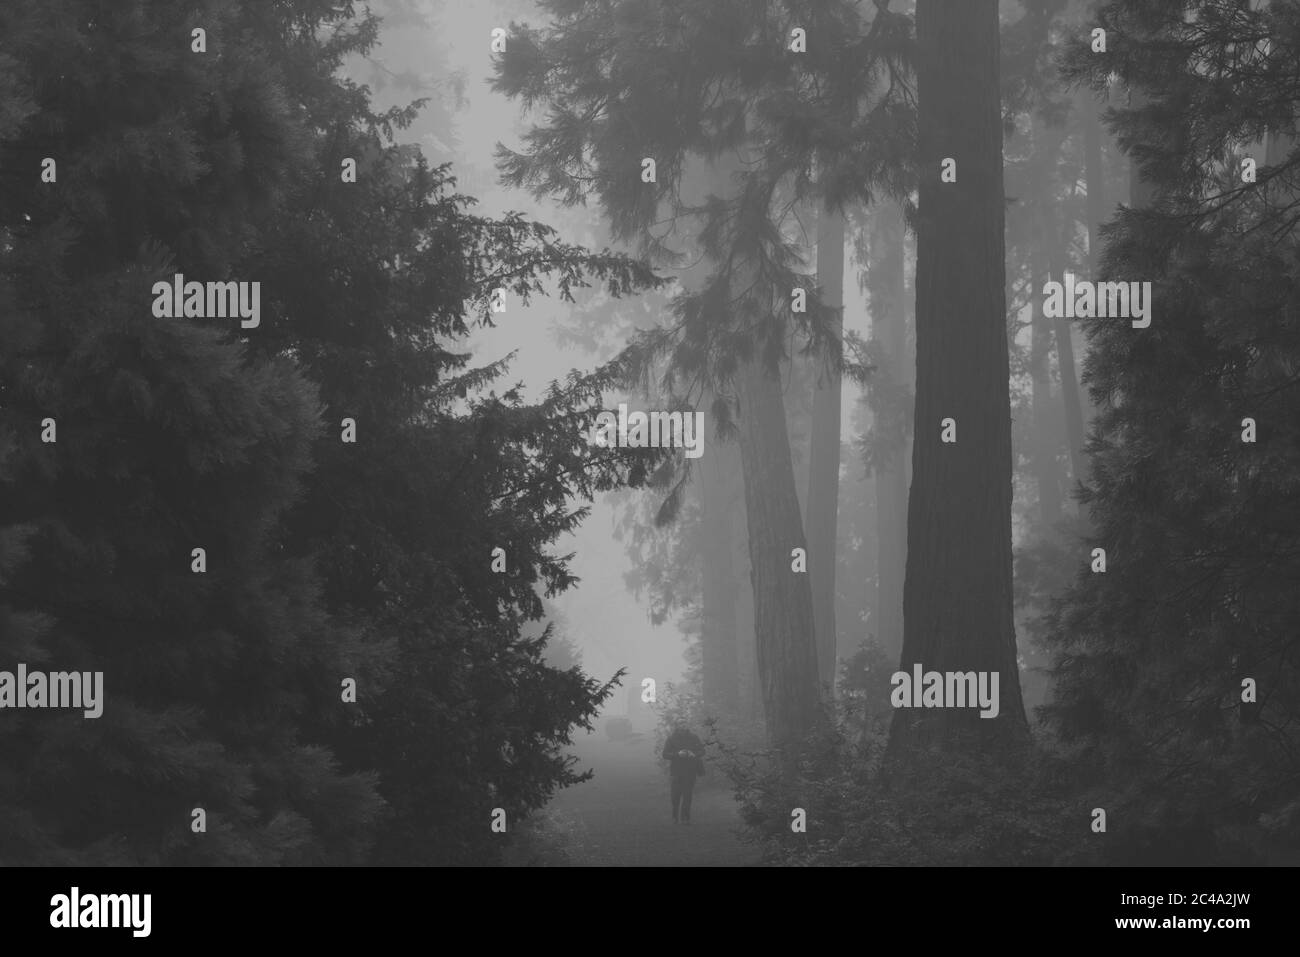 On a foggy morning stands a photographer in a forest of giant sequoias (Sequoiadendron giganteum). Stock Photo